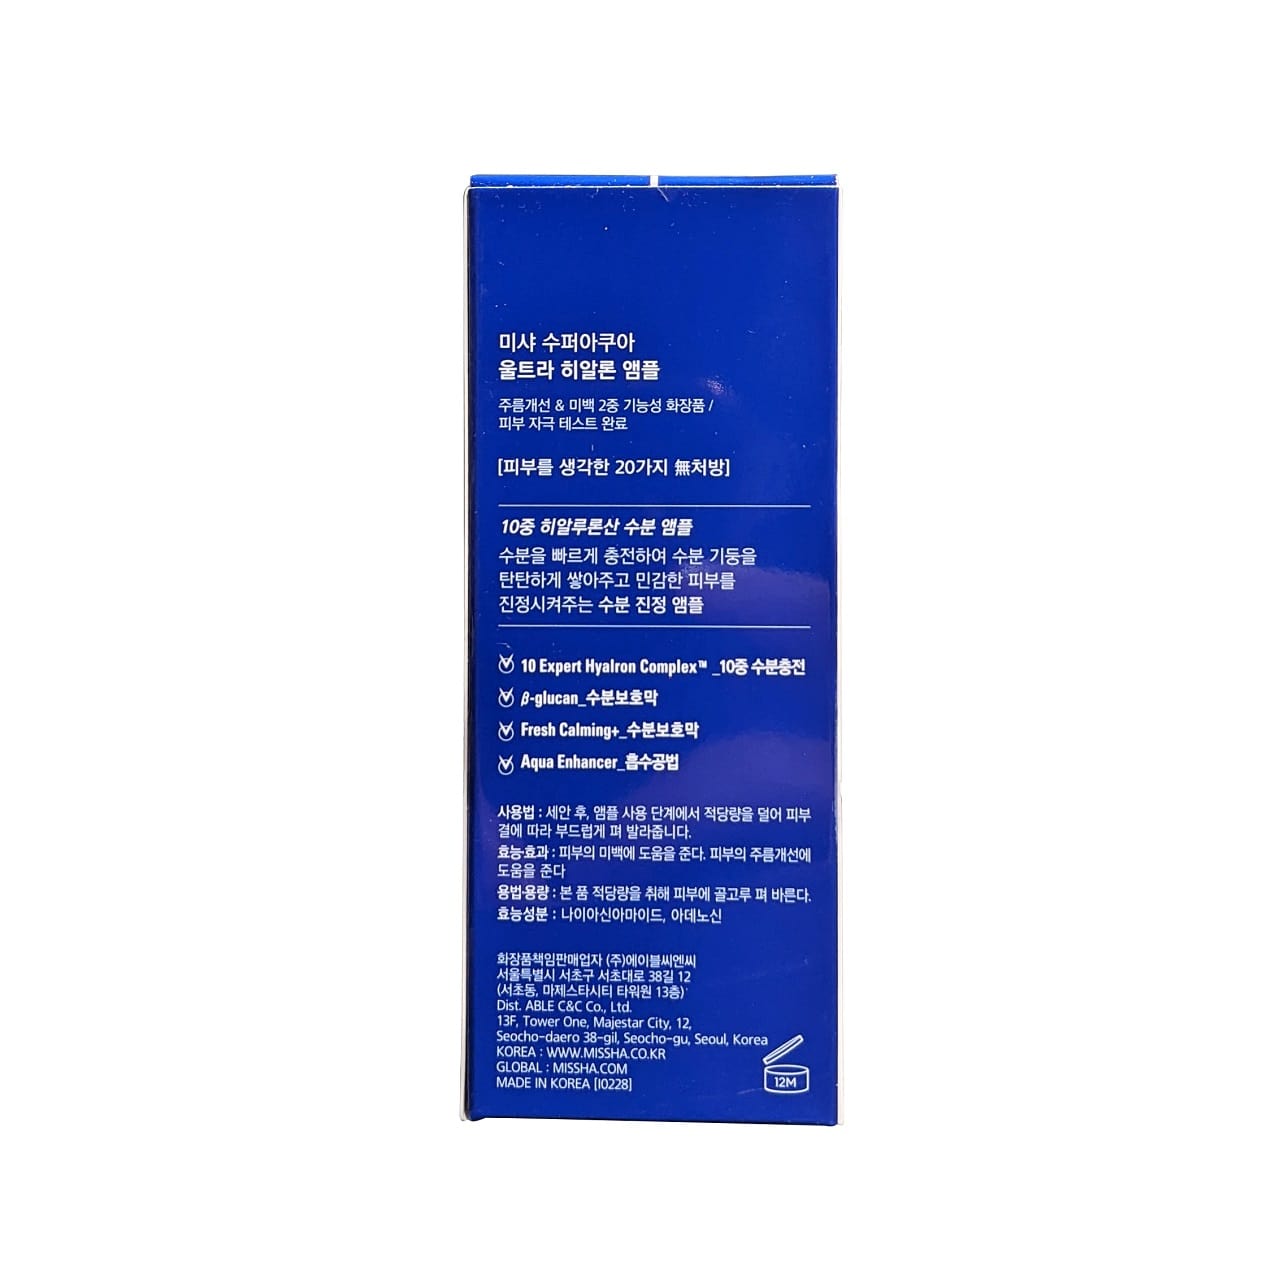 Directions, caution, and ingredients for MISSHA Super Aqua Ultra Hyalron Ampoule (47 mL) in Korean